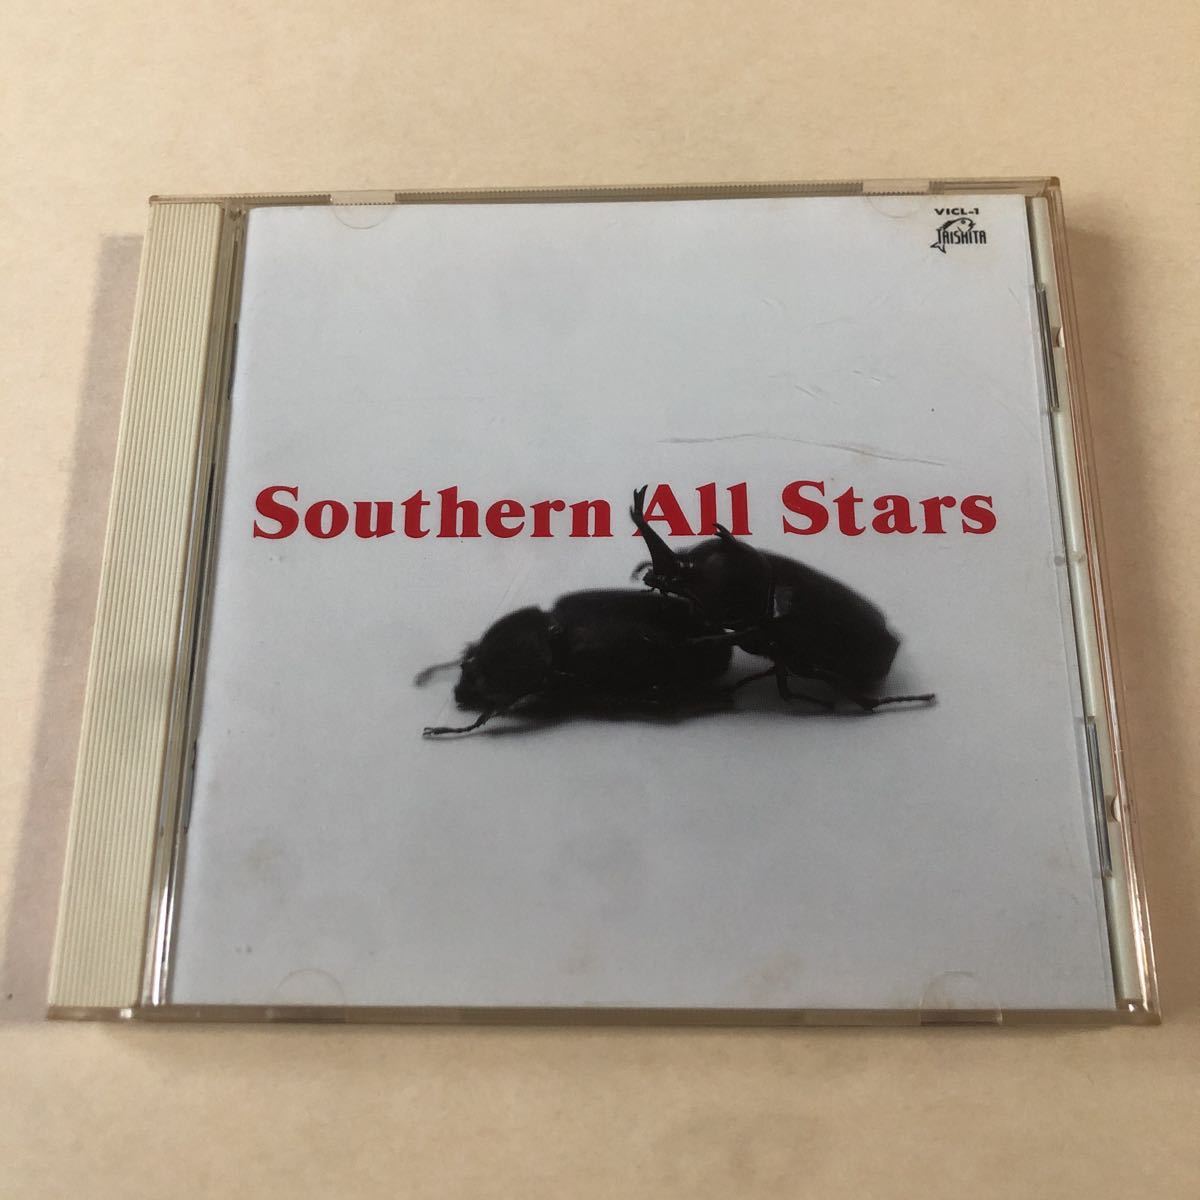 SOUTHERN ALL STARS 1CD "SOUTHERN ALL STARS"